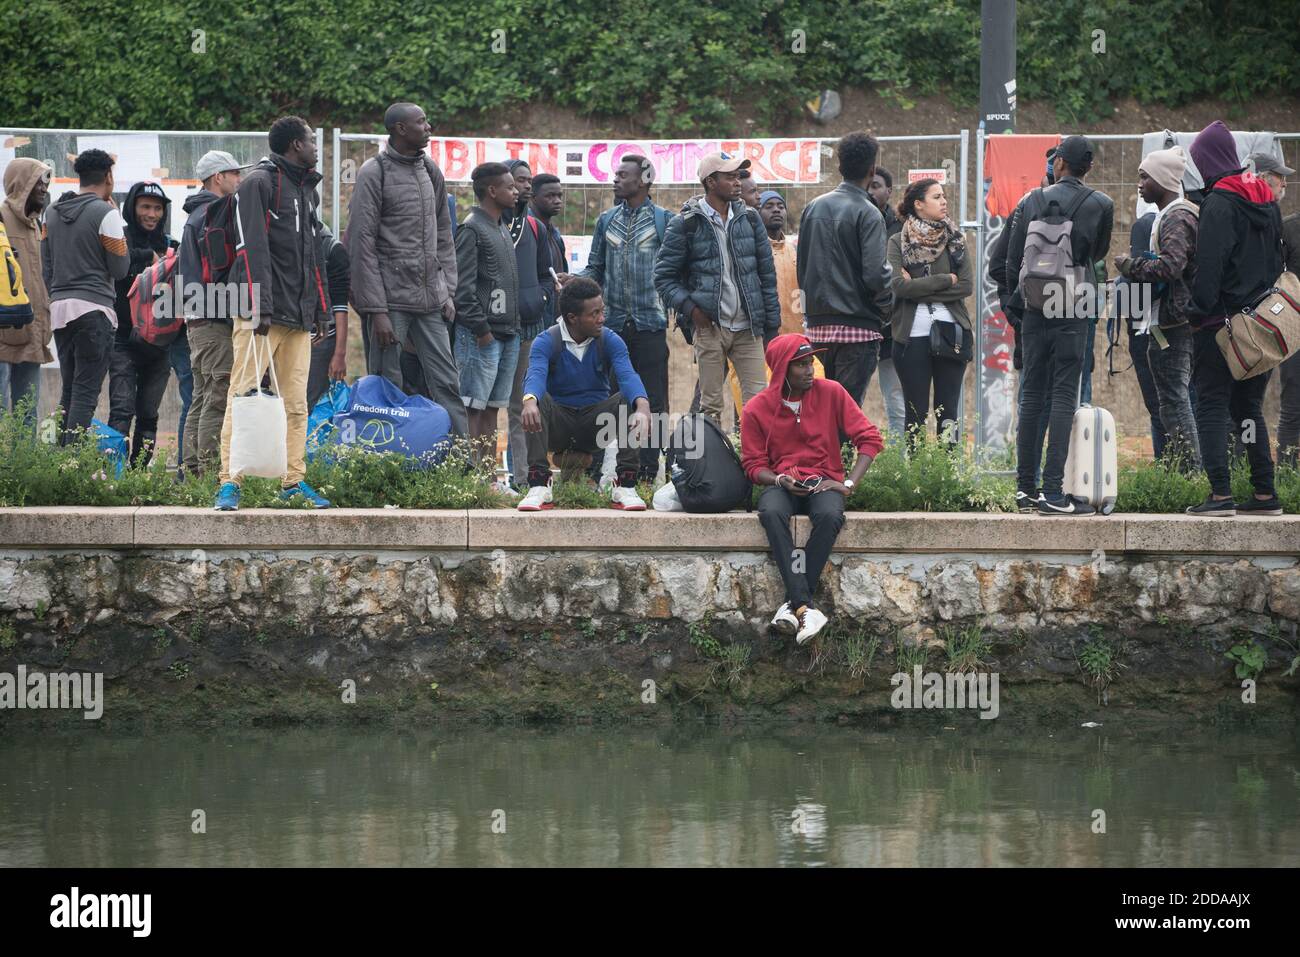 Migrants carry their belongings during the evacuation of the Millenaire makeshift camp along the Canal de Saint-Denis near Porte de la Villette, northern Paris, France, on May 30, 2018. More than a thousand migrants and refugees were evacuated on early May 30, 2018 from a makeshift camp that had been set up for several weeks along the Canal. Photo by Samuel Boivin/ABACAPRESS.COM Stock Photo